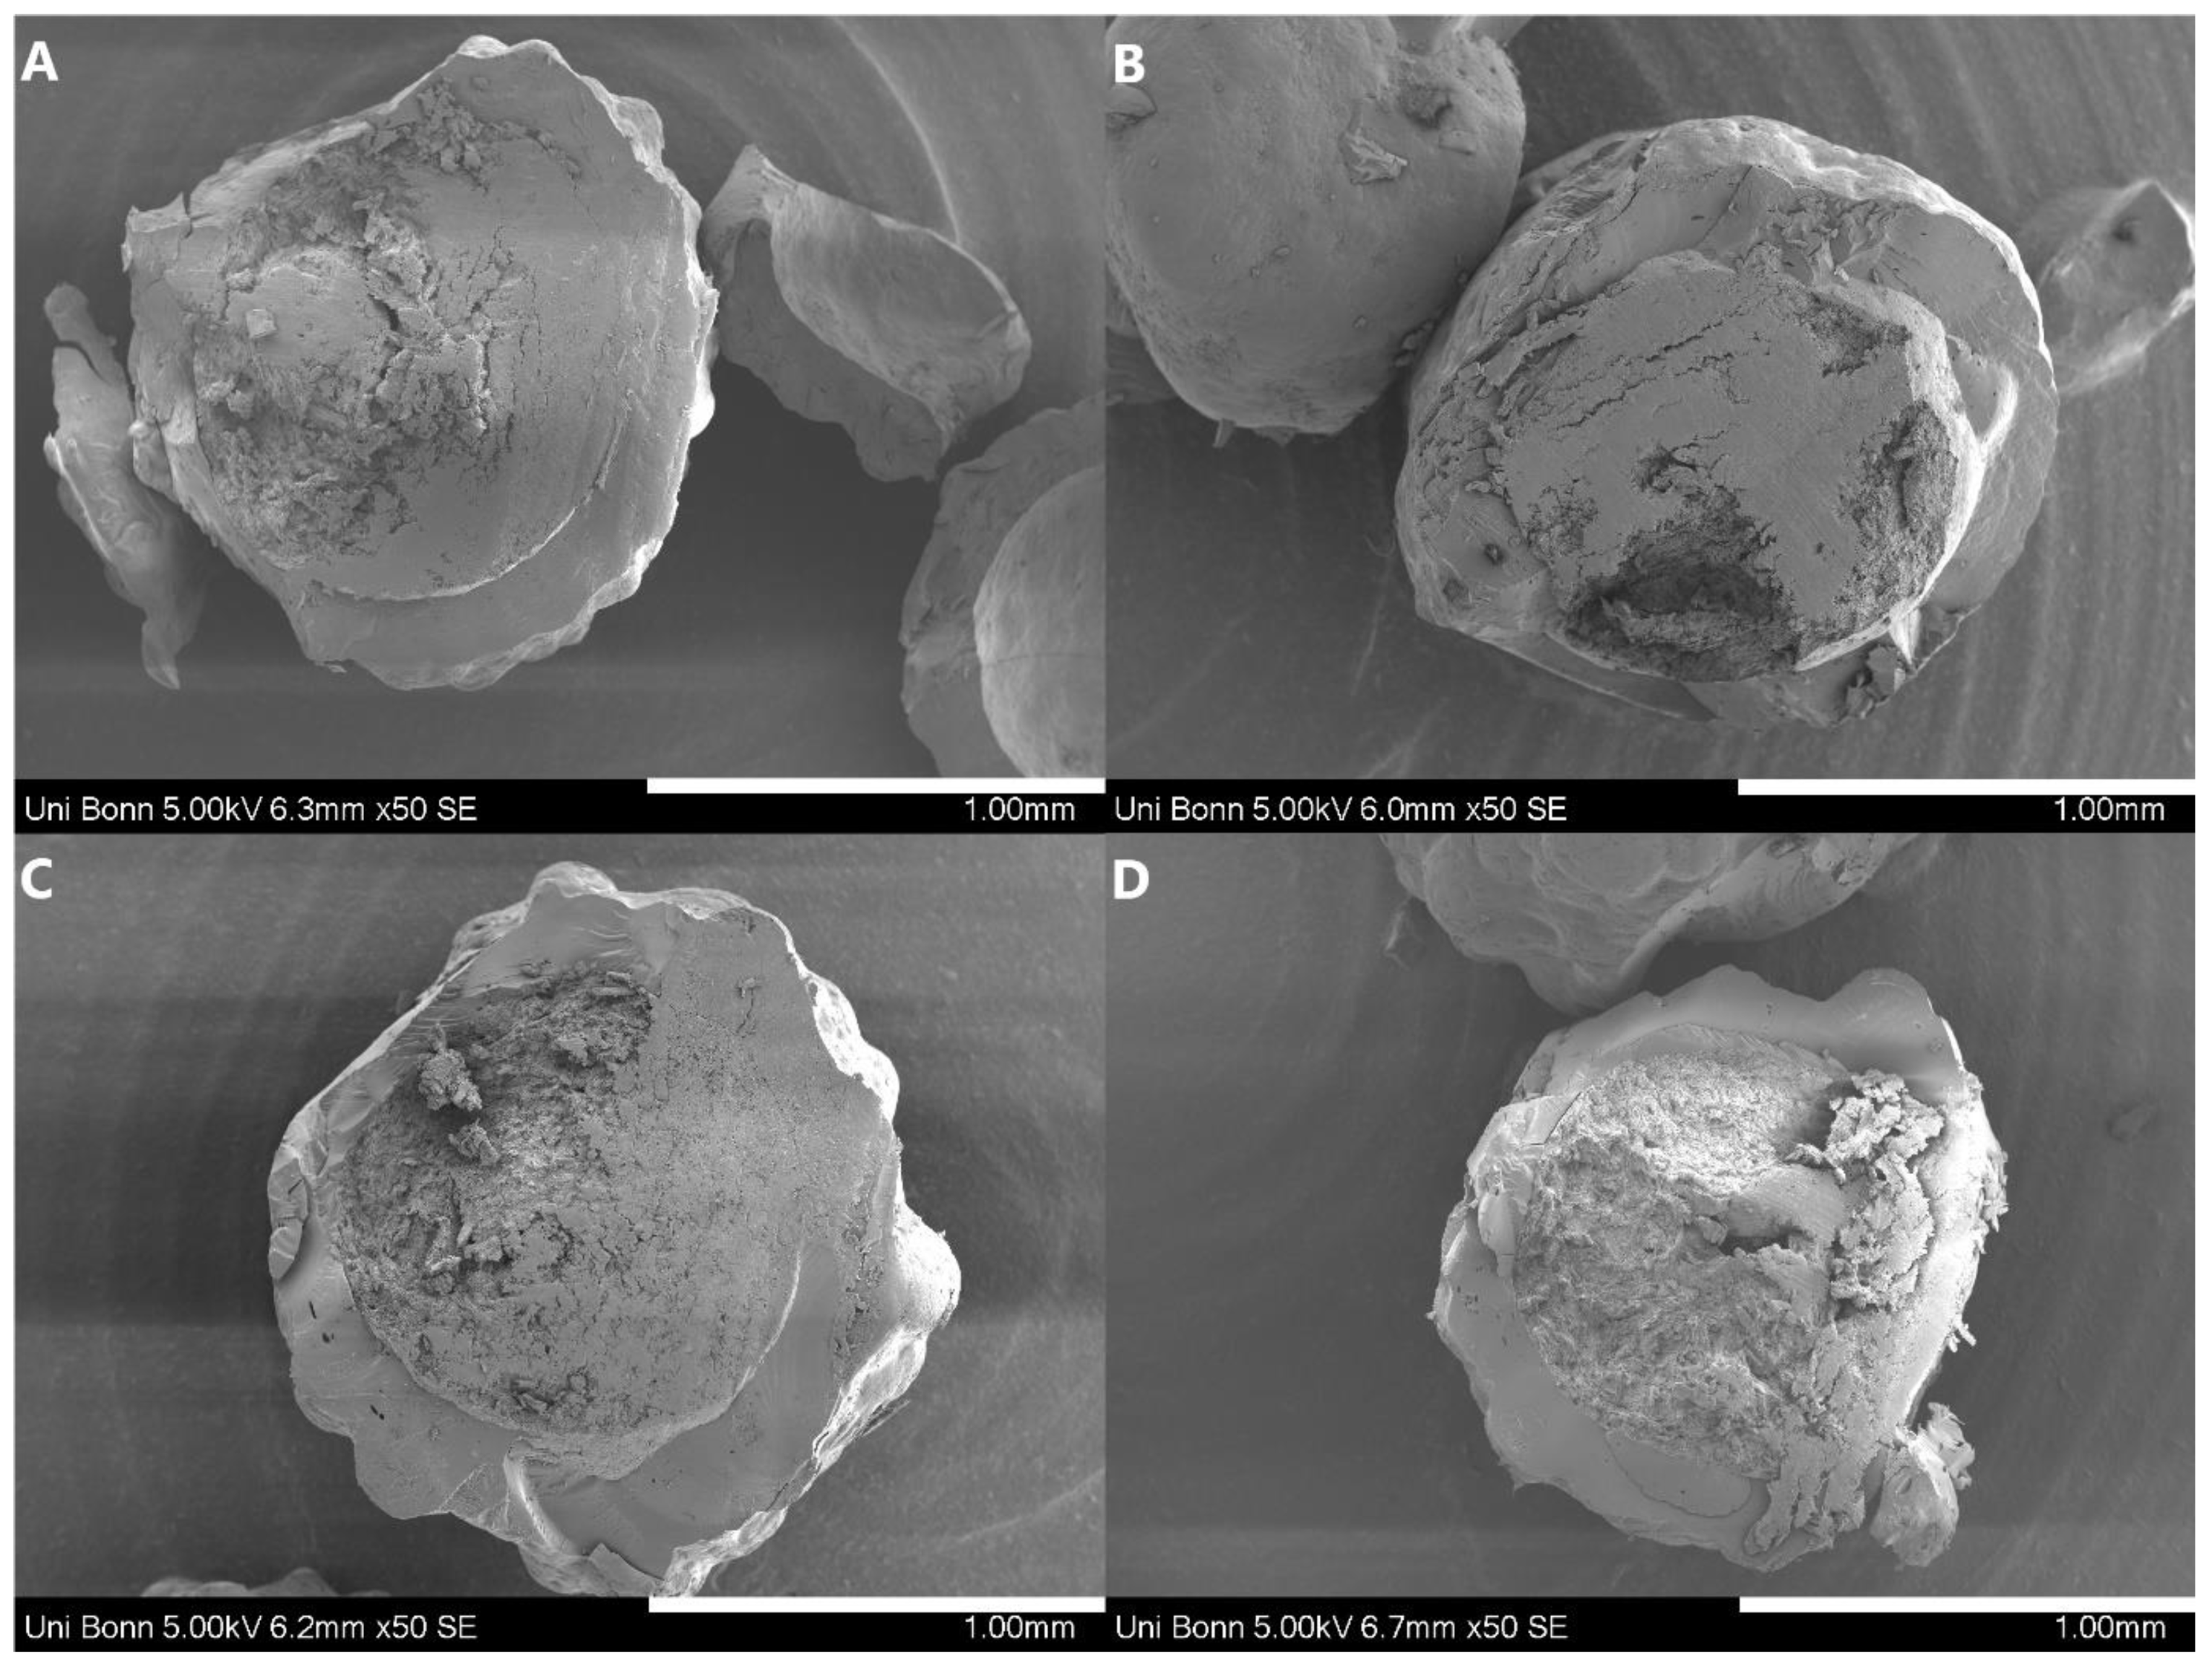 Amorphous Solid Dispersions Layered onto Pellets—An Alternative to Spray Drying?